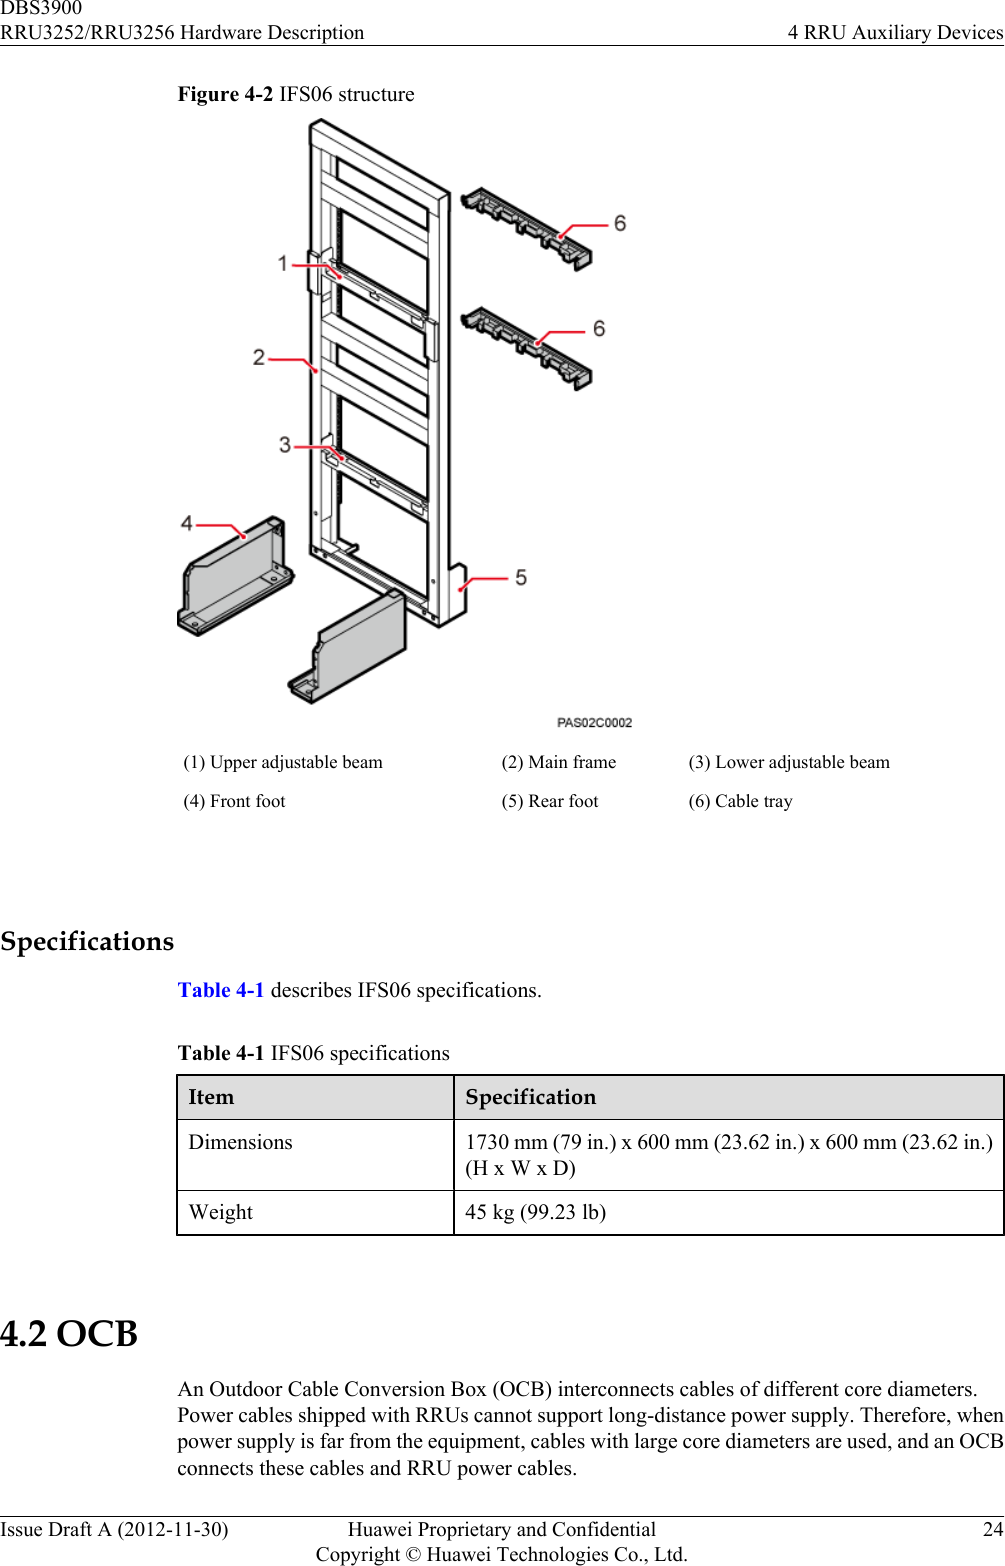 Figure 4-2 IFS06 structure(1) Upper adjustable beam (2) Main frame (3) Lower adjustable beam(4) Front foot (5) Rear foot (6) Cable tray SpecificationsTable 4-1 describes IFS06 specifications.Table 4-1 IFS06 specificationsItem SpecificationDimensions 1730 mm (79 in.) x 600 mm (23.62 in.) x 600 mm (23.62 in.)(H x W x D)Weight 45 kg (99.23 lb) 4.2 OCBAn Outdoor Cable Conversion Box (OCB) interconnects cables of different core diameters.Power cables shipped with RRUs cannot support long-distance power supply. Therefore, whenpower supply is far from the equipment, cables with large core diameters are used, and an OCBconnects these cables and RRU power cables.DBS3900RRU3252/RRU3256 Hardware Description 4 RRU Auxiliary DevicesIssue Draft A (2012-11-30) Huawei Proprietary and ConfidentialCopyright © Huawei Technologies Co., Ltd.24